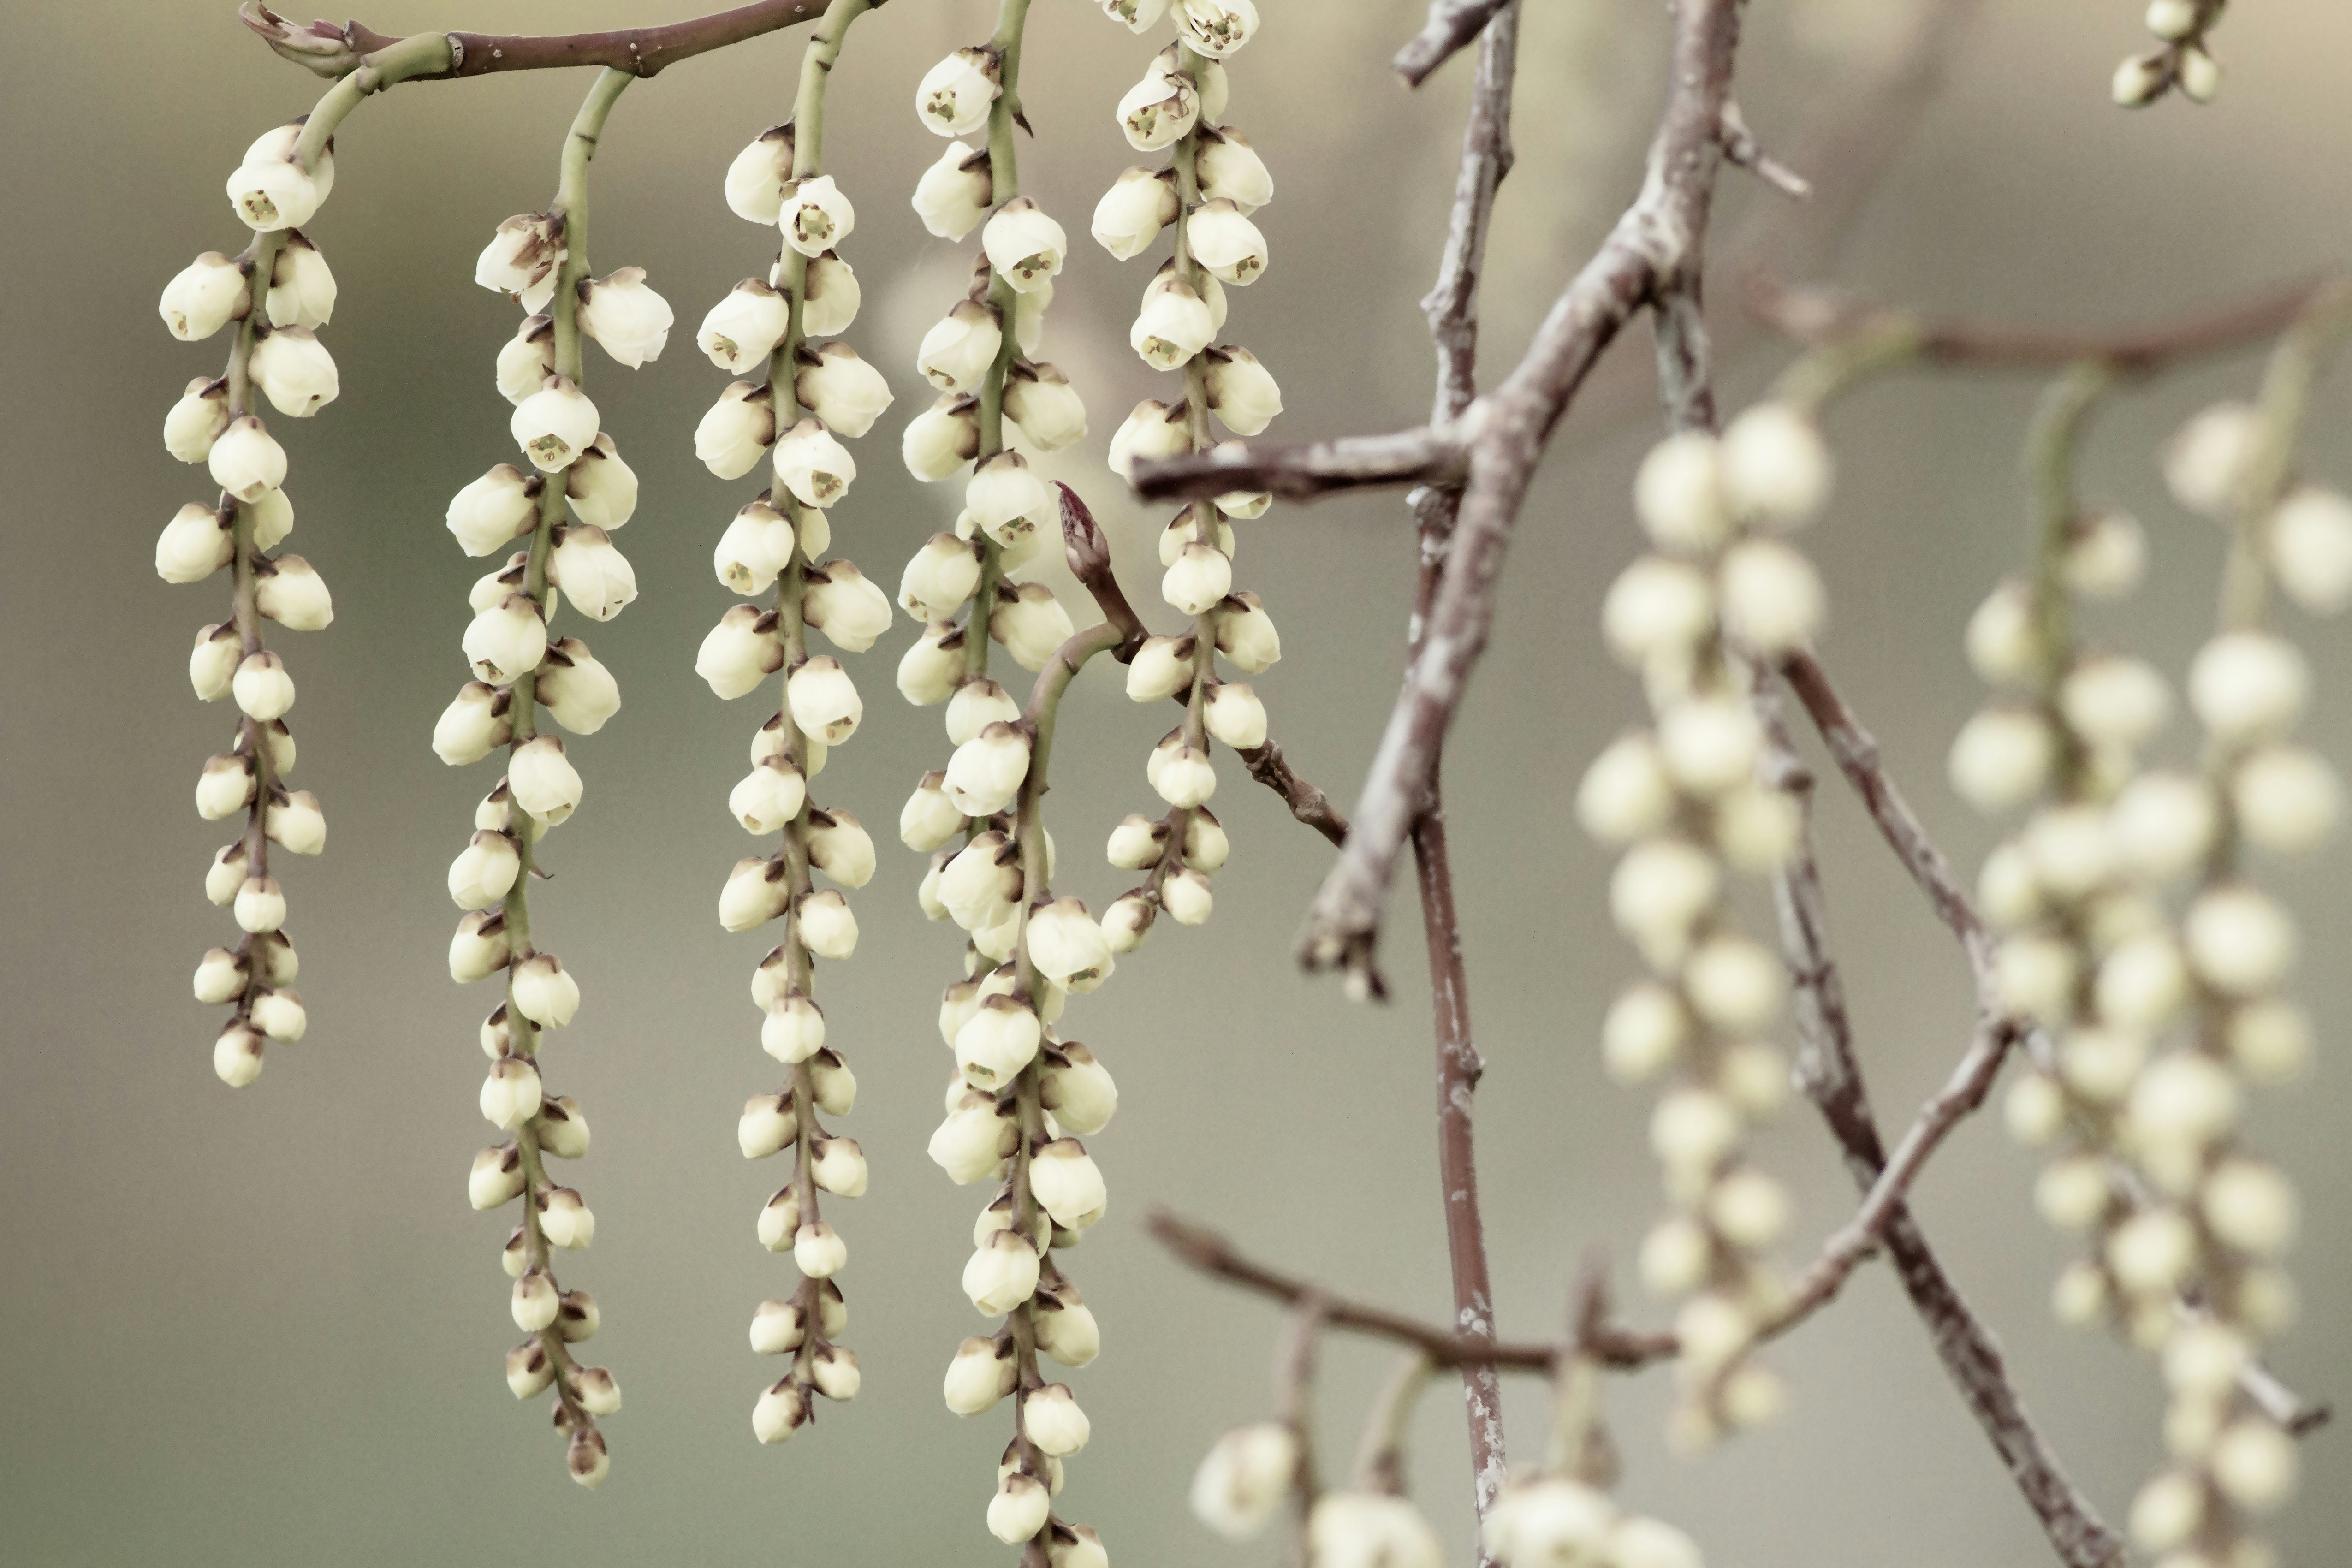 yellow round fruits on brown tree branch